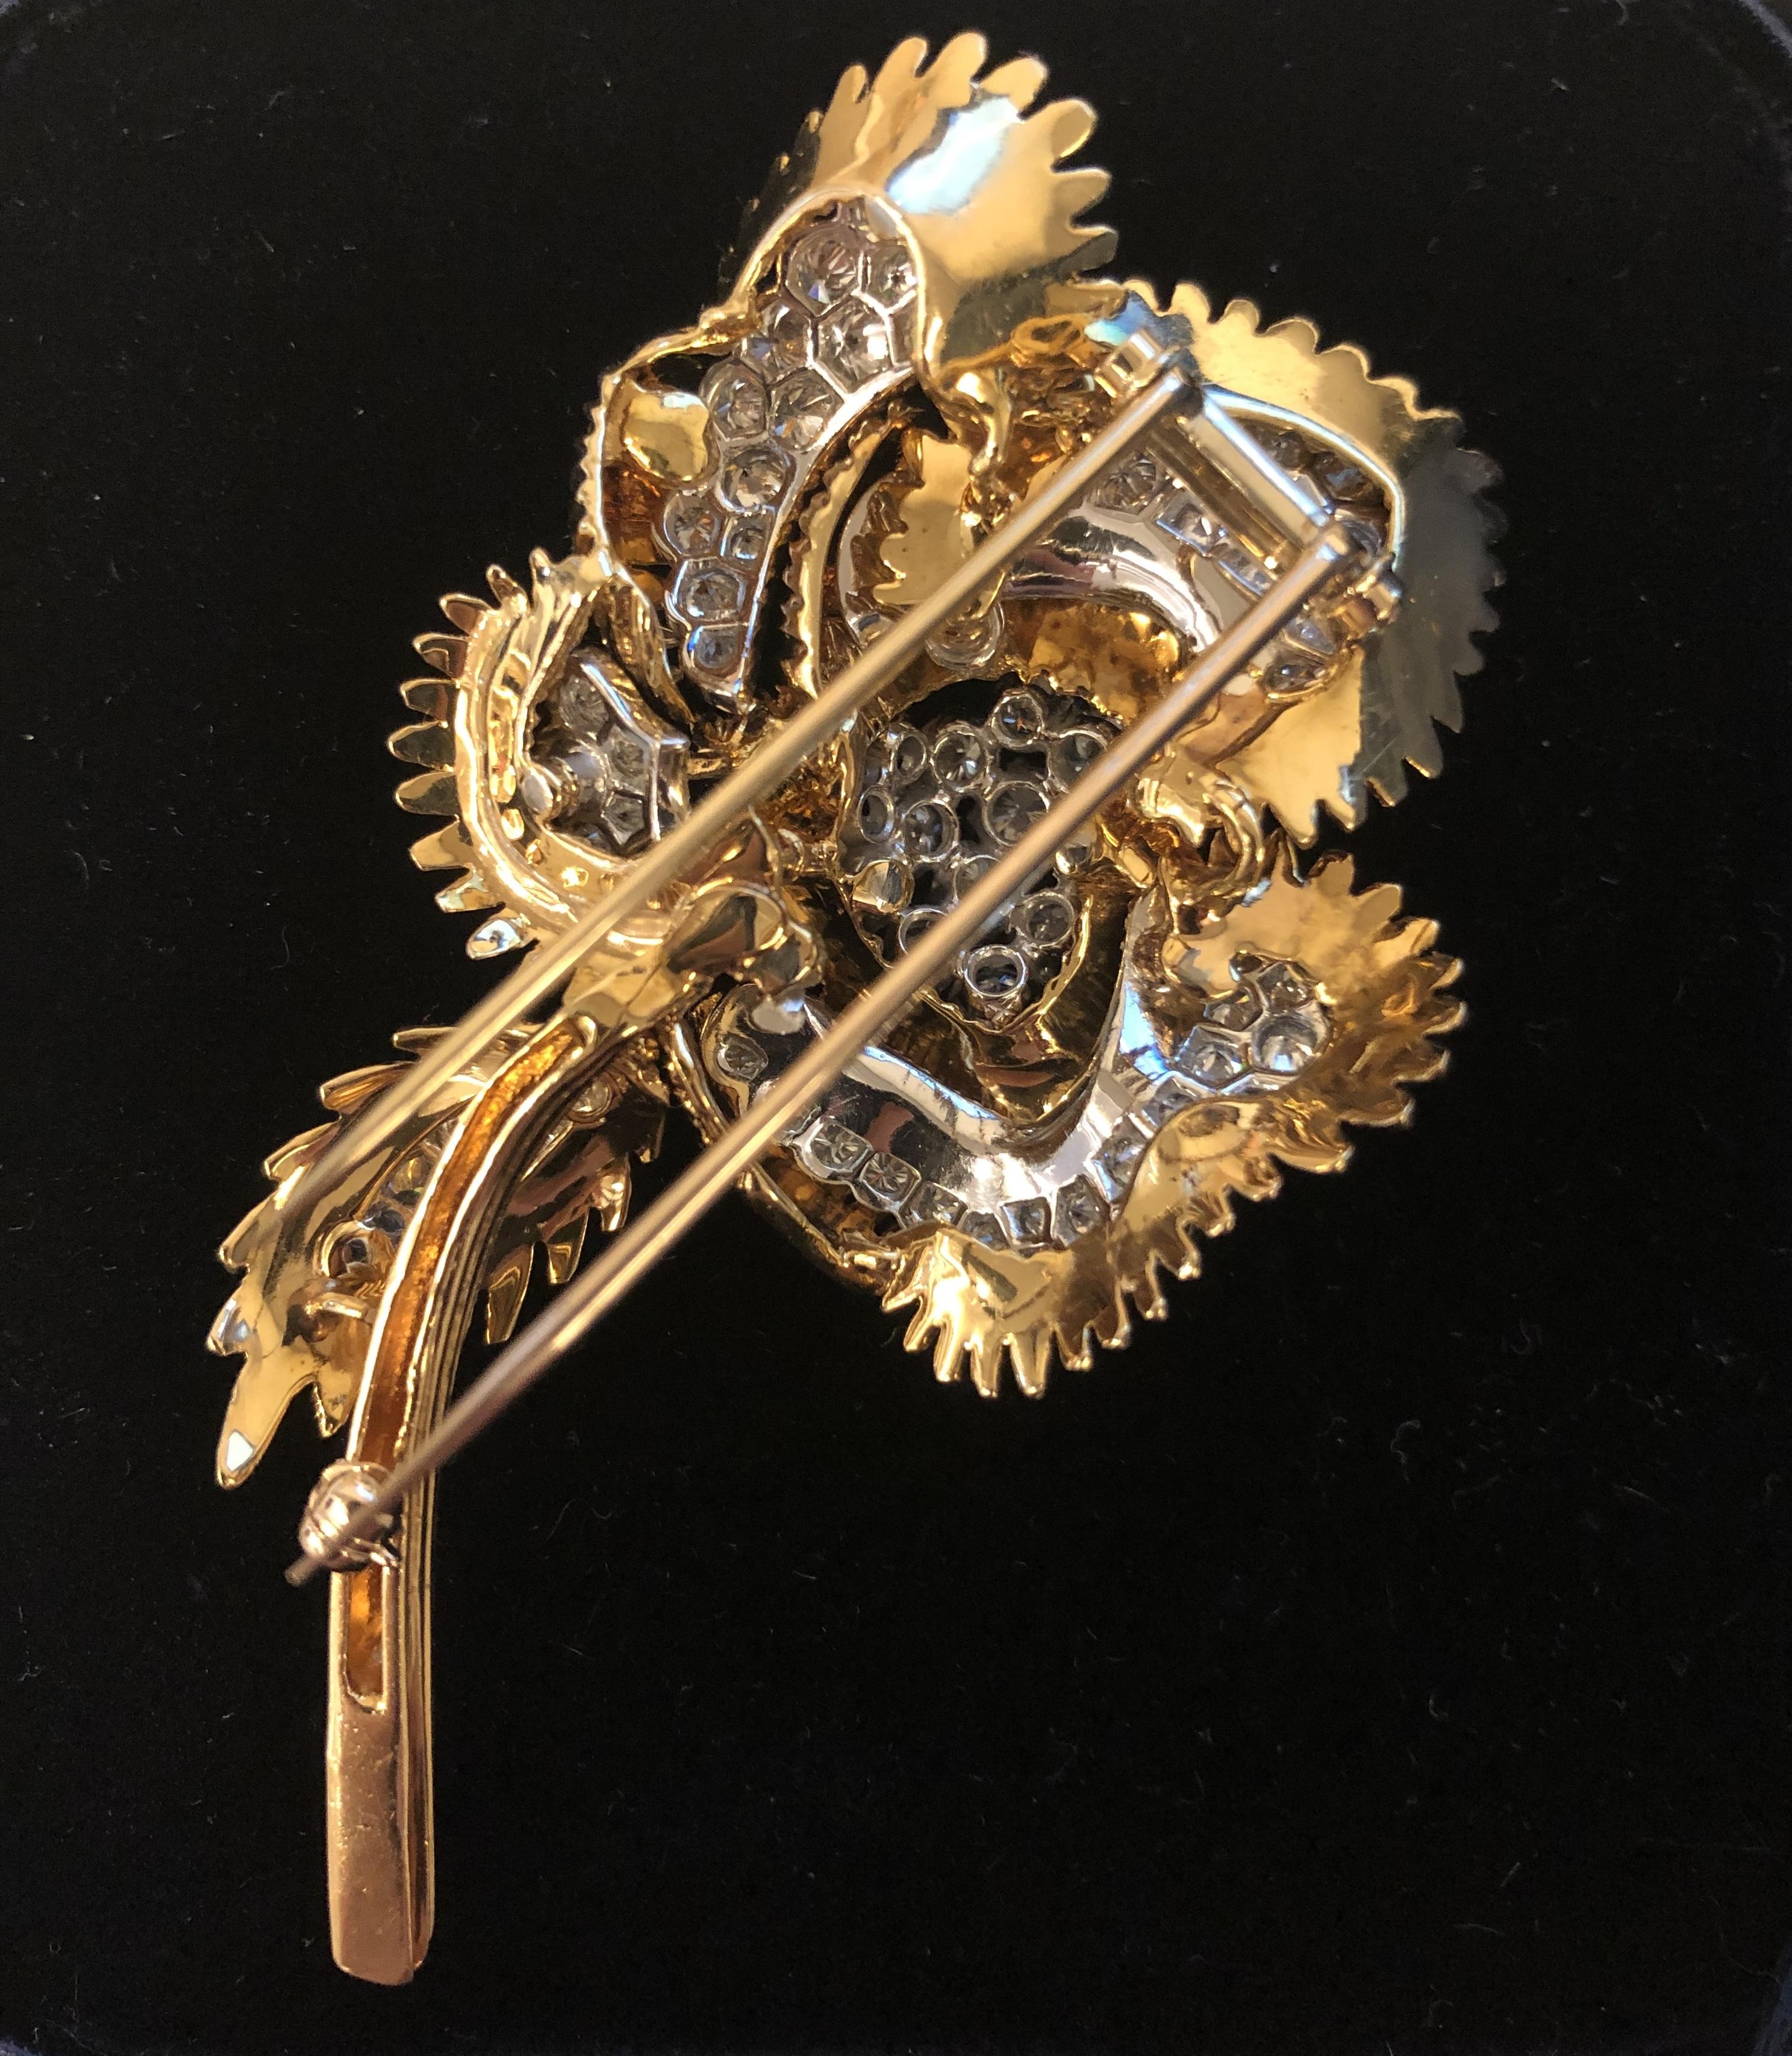 A Mid-20th Century 18 karat gold and platinum brooch with diamonds by Tiffany & Co. The flower brooch has six unique, blooming petals studded with diamonds and framed with textured gold. The piece has 73 round cut diamonds with an approximate total